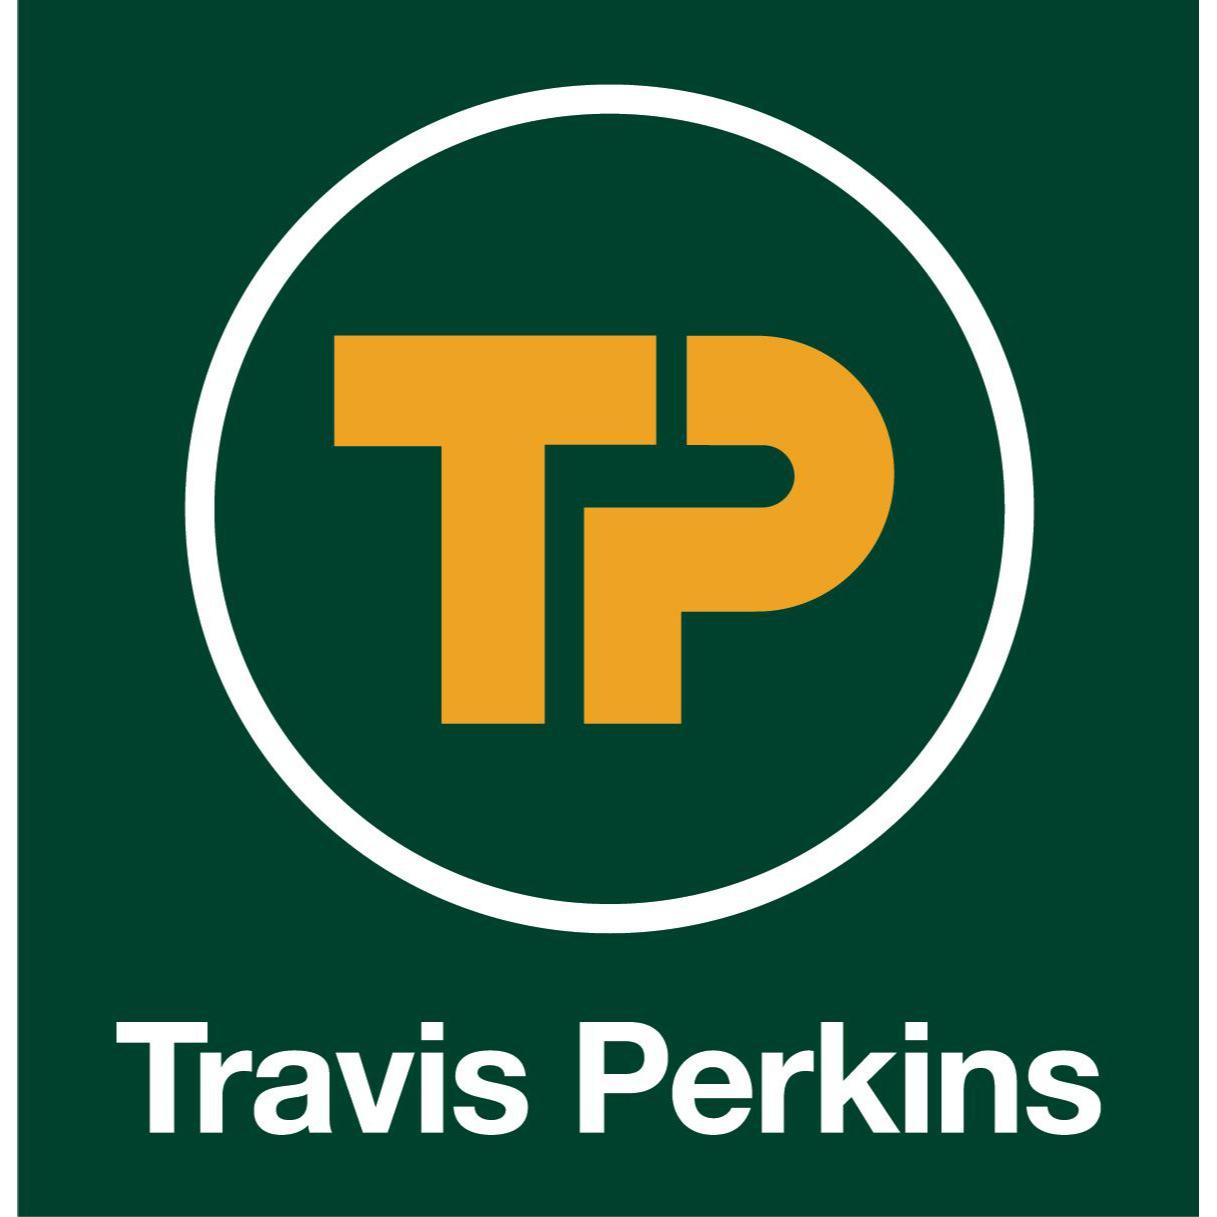 Travis Perkins - Wilmslow, Cheshire SK9 1PY - 01625 524770 | ShowMeLocal.com